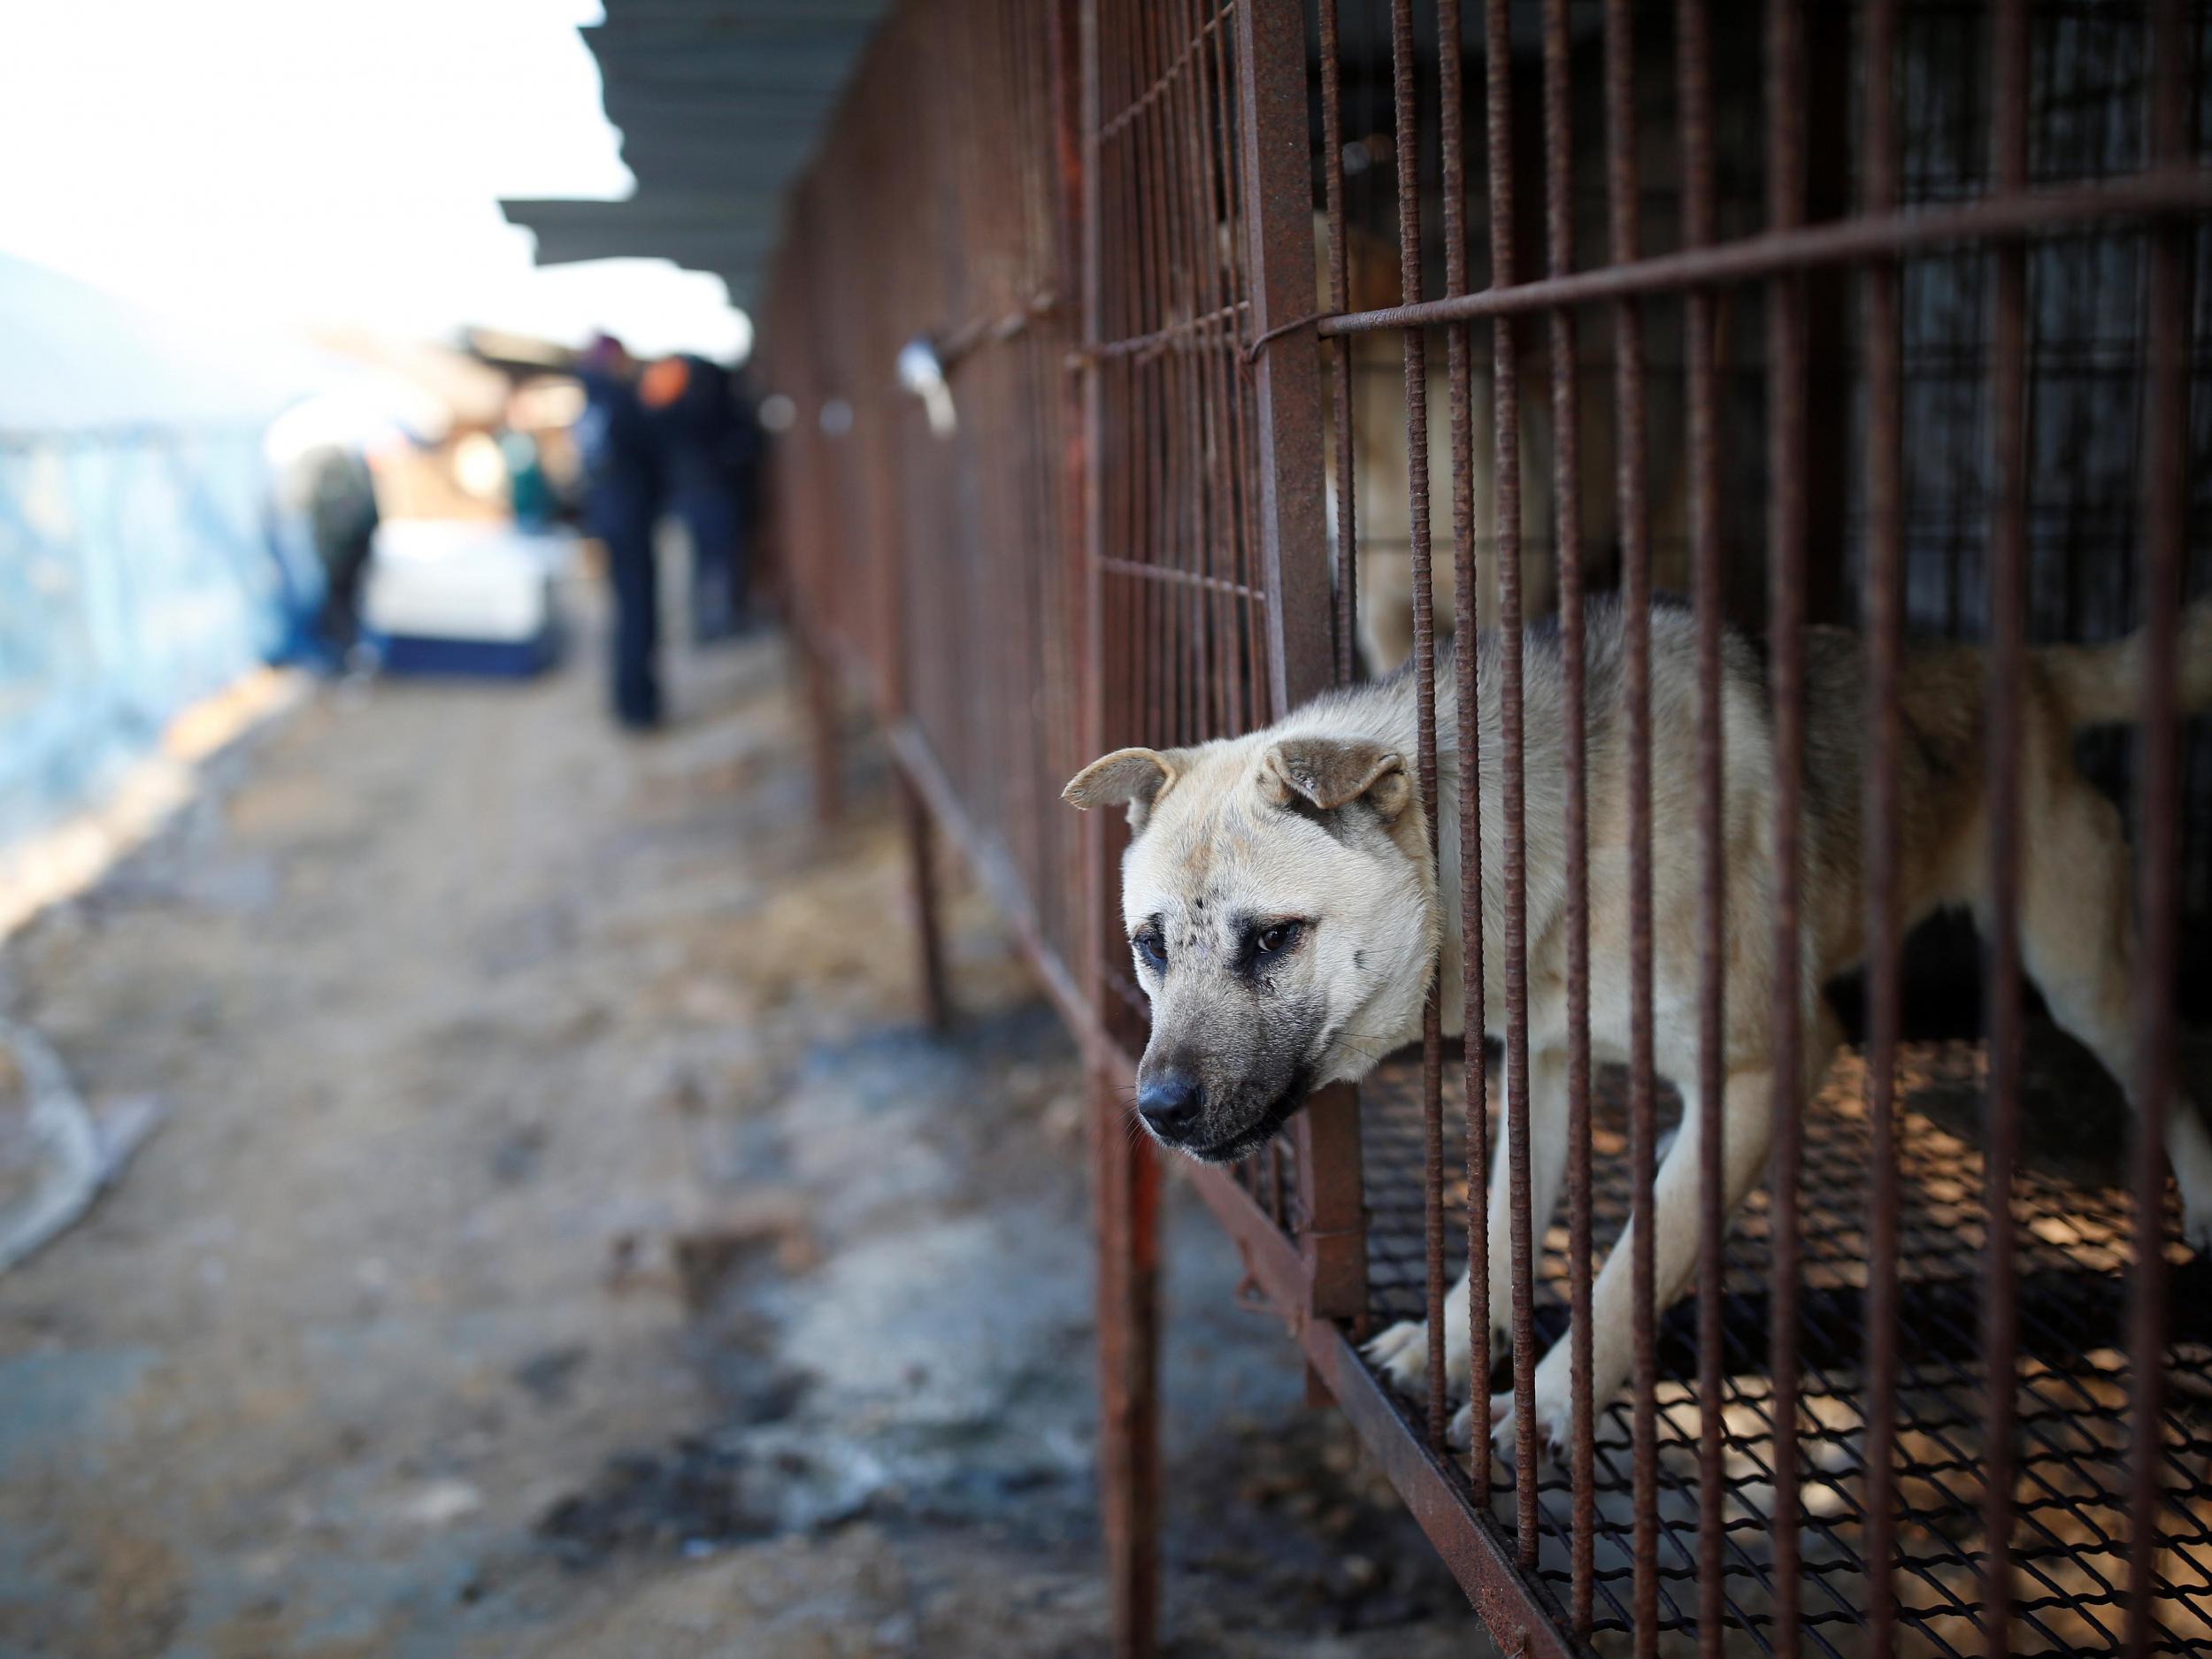 A dog is pictured in a cage at a canine meat farm in Wonju, South Korea, 10 January 2017.